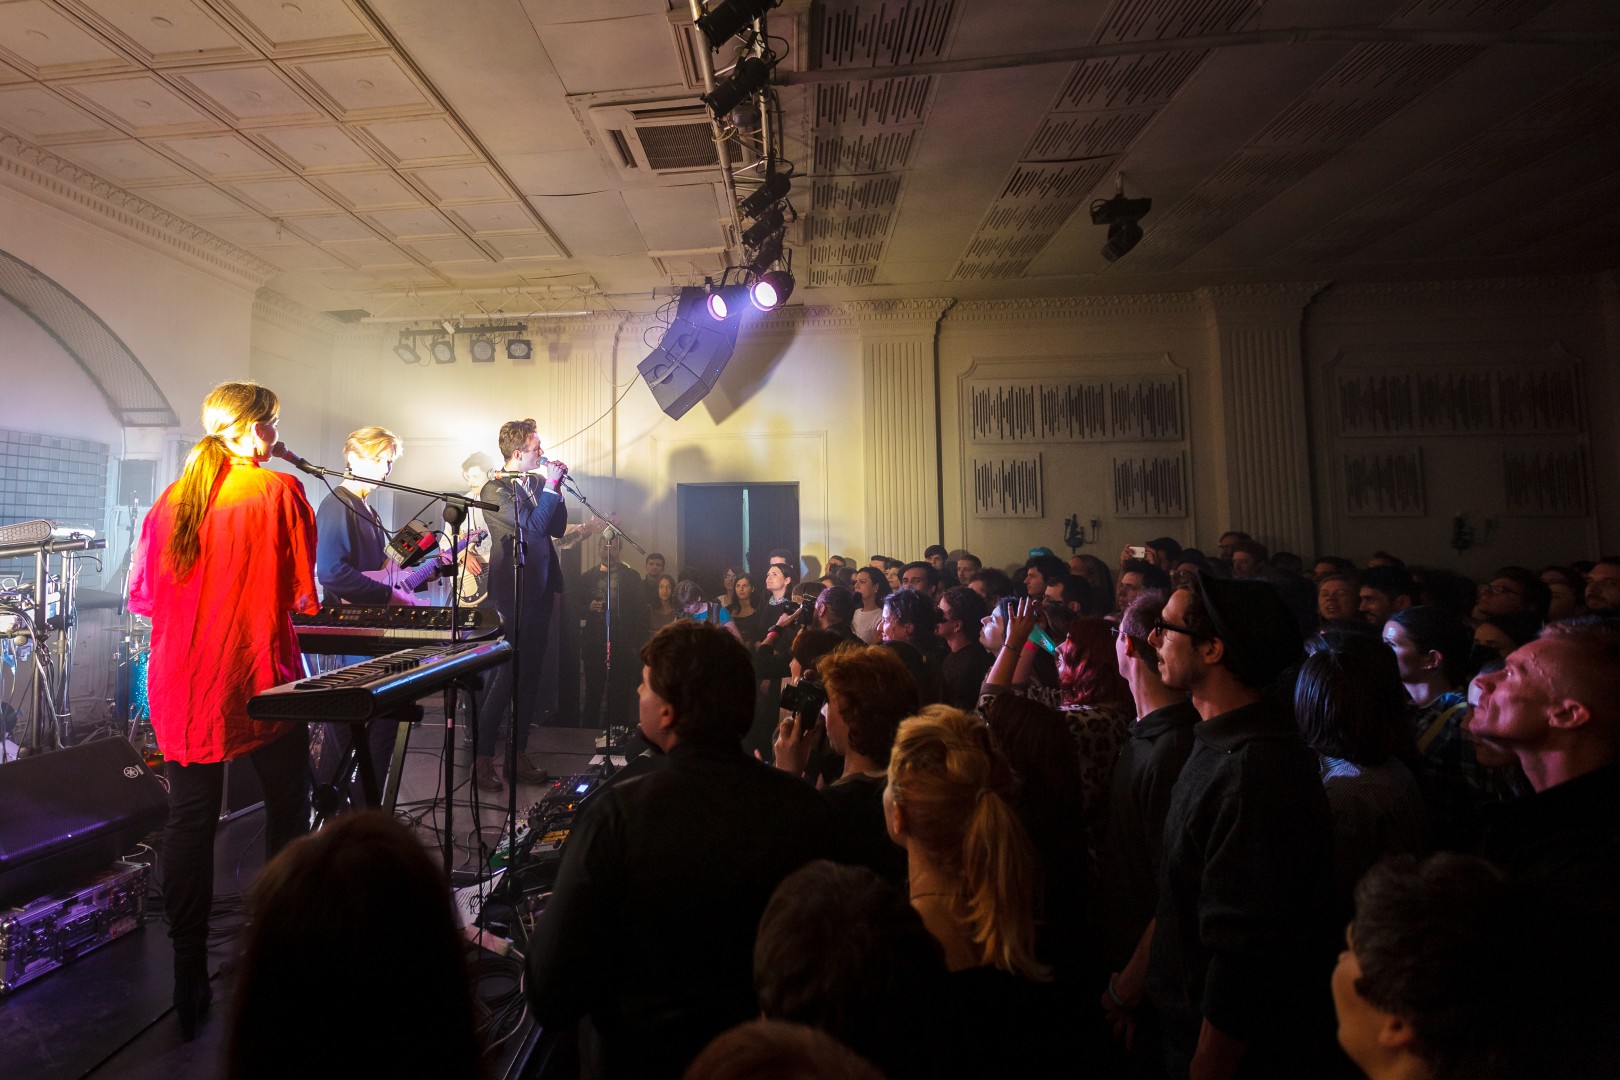 Efterklang at Control Club in Bucharest on November 13, 2013 (6e27a20e5f)